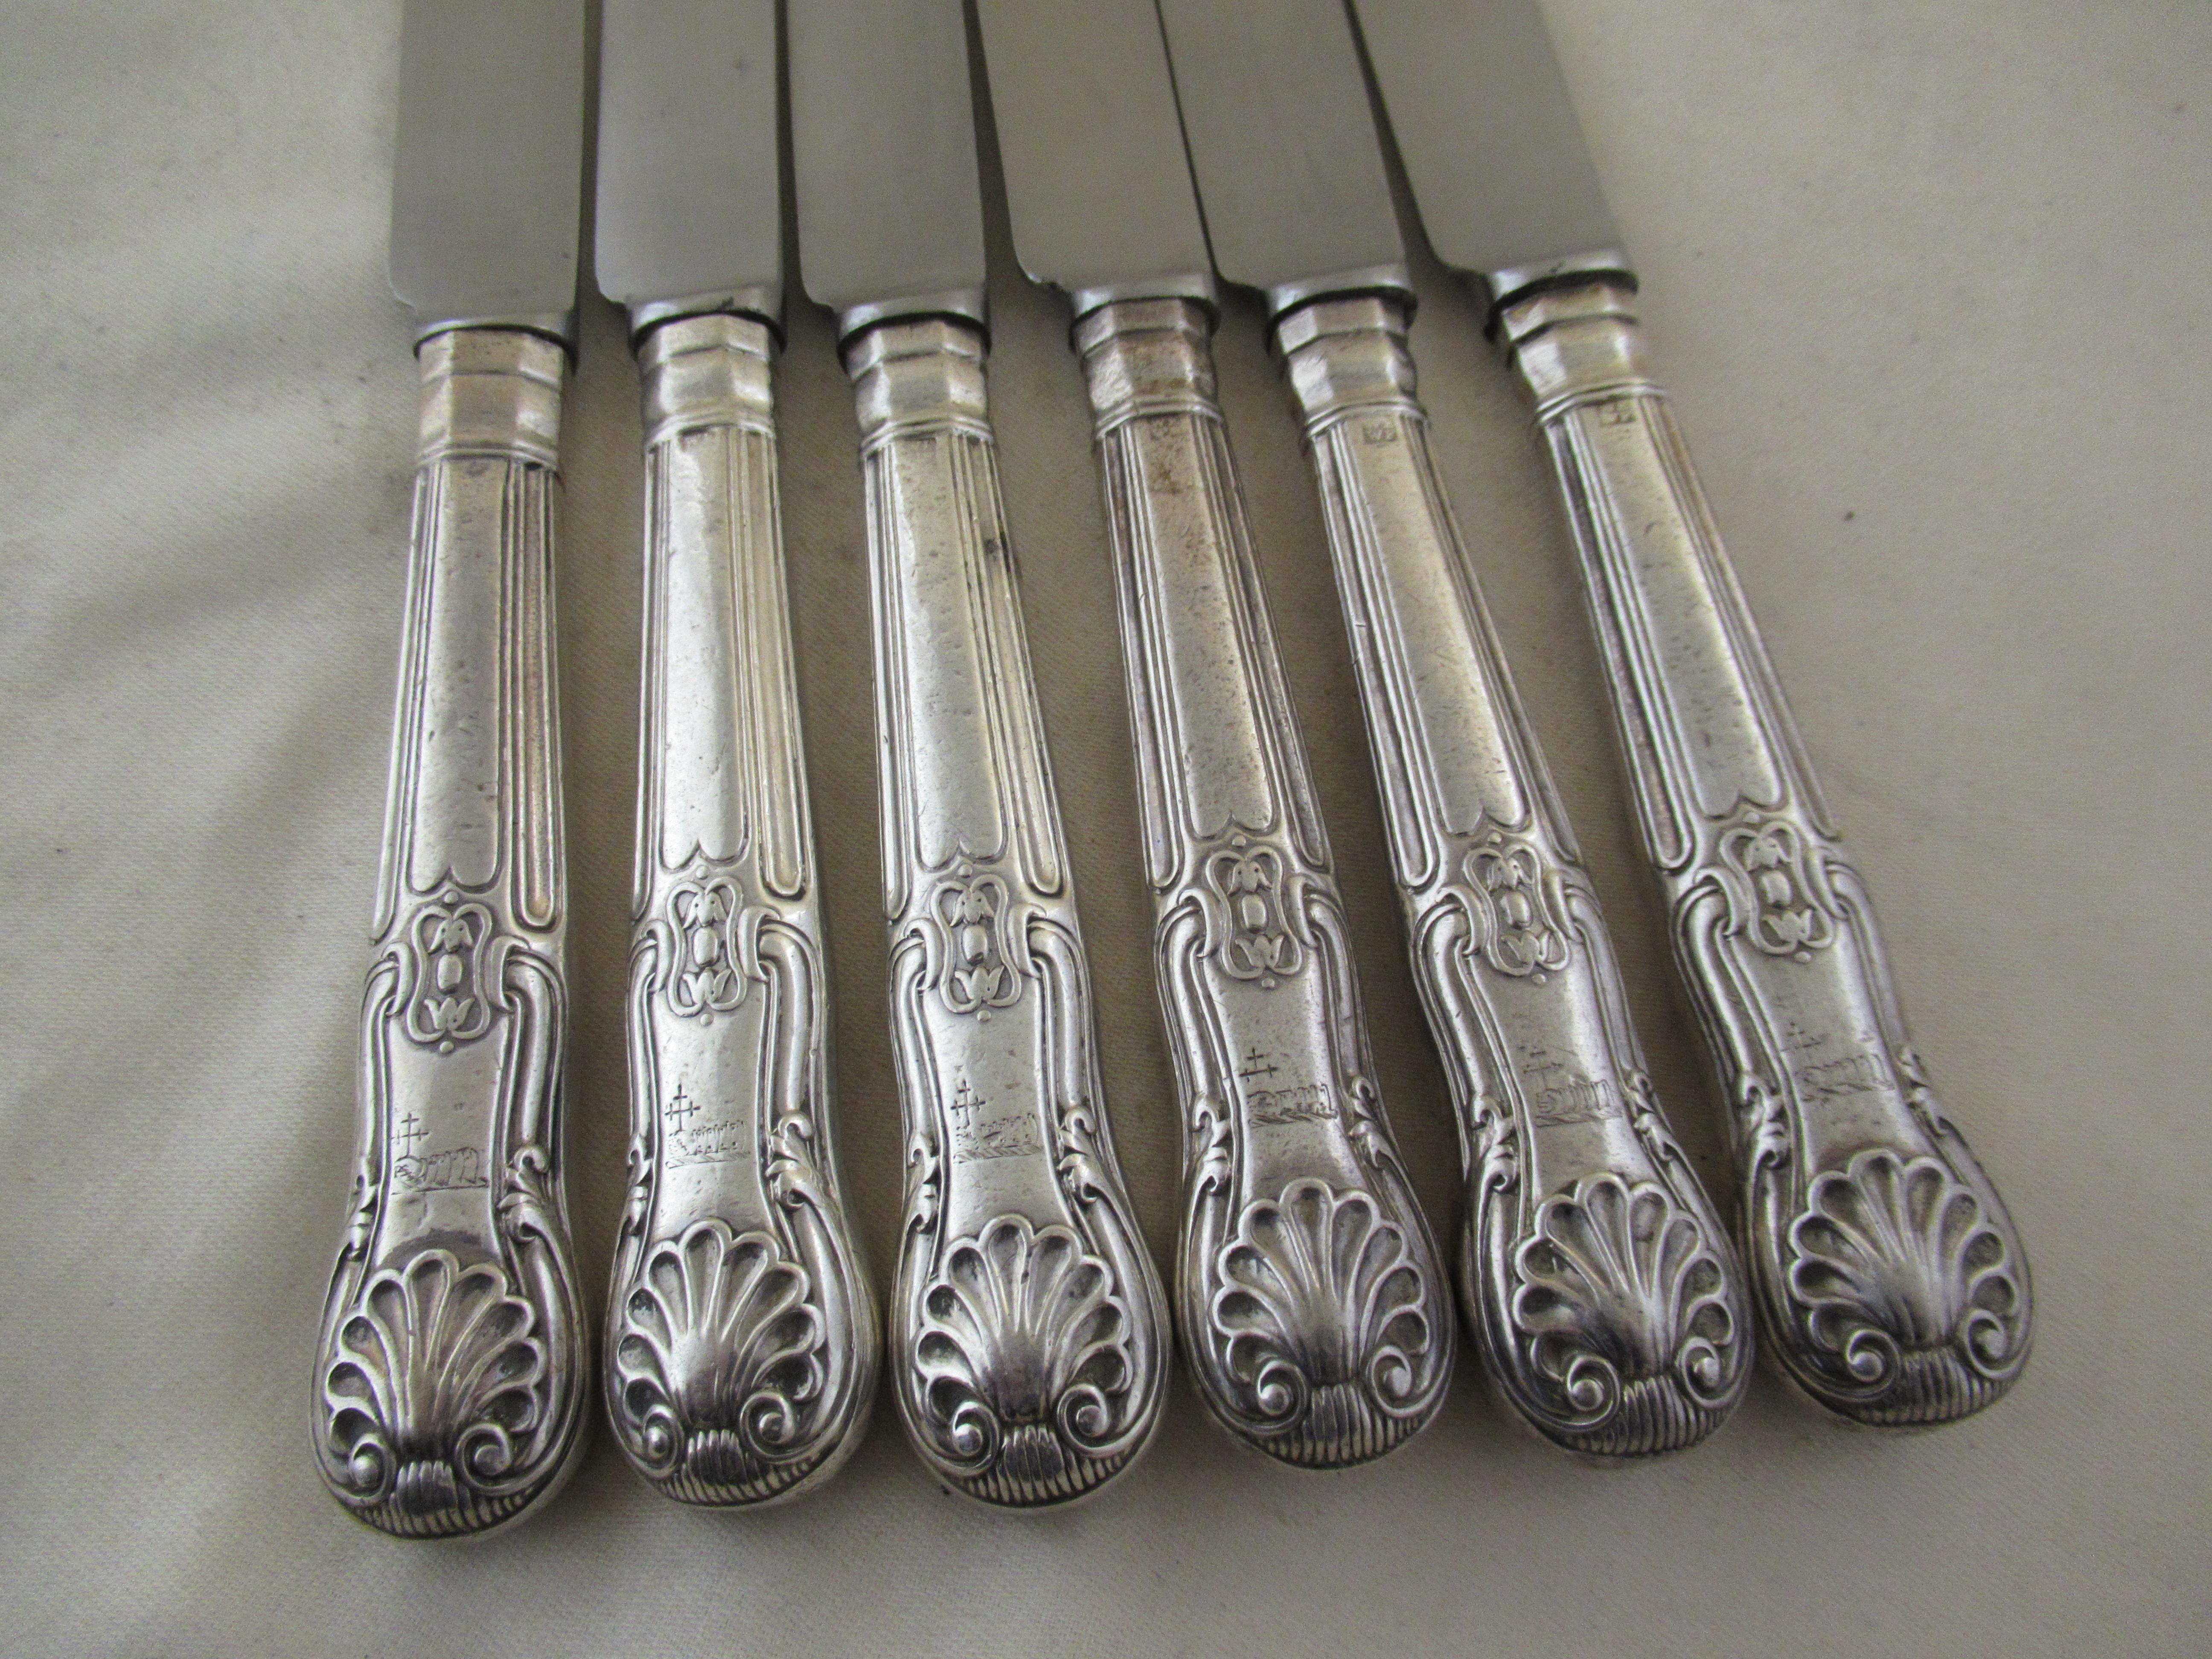 Sterling silver set of 6 kings pattern dessert knives.
All 6 pieces are stamped with a full English hallmark, applied by the London Assay Office, but not all the marks are legible on all six pieces:-
 Lower case g & h - Date letters for London 1822